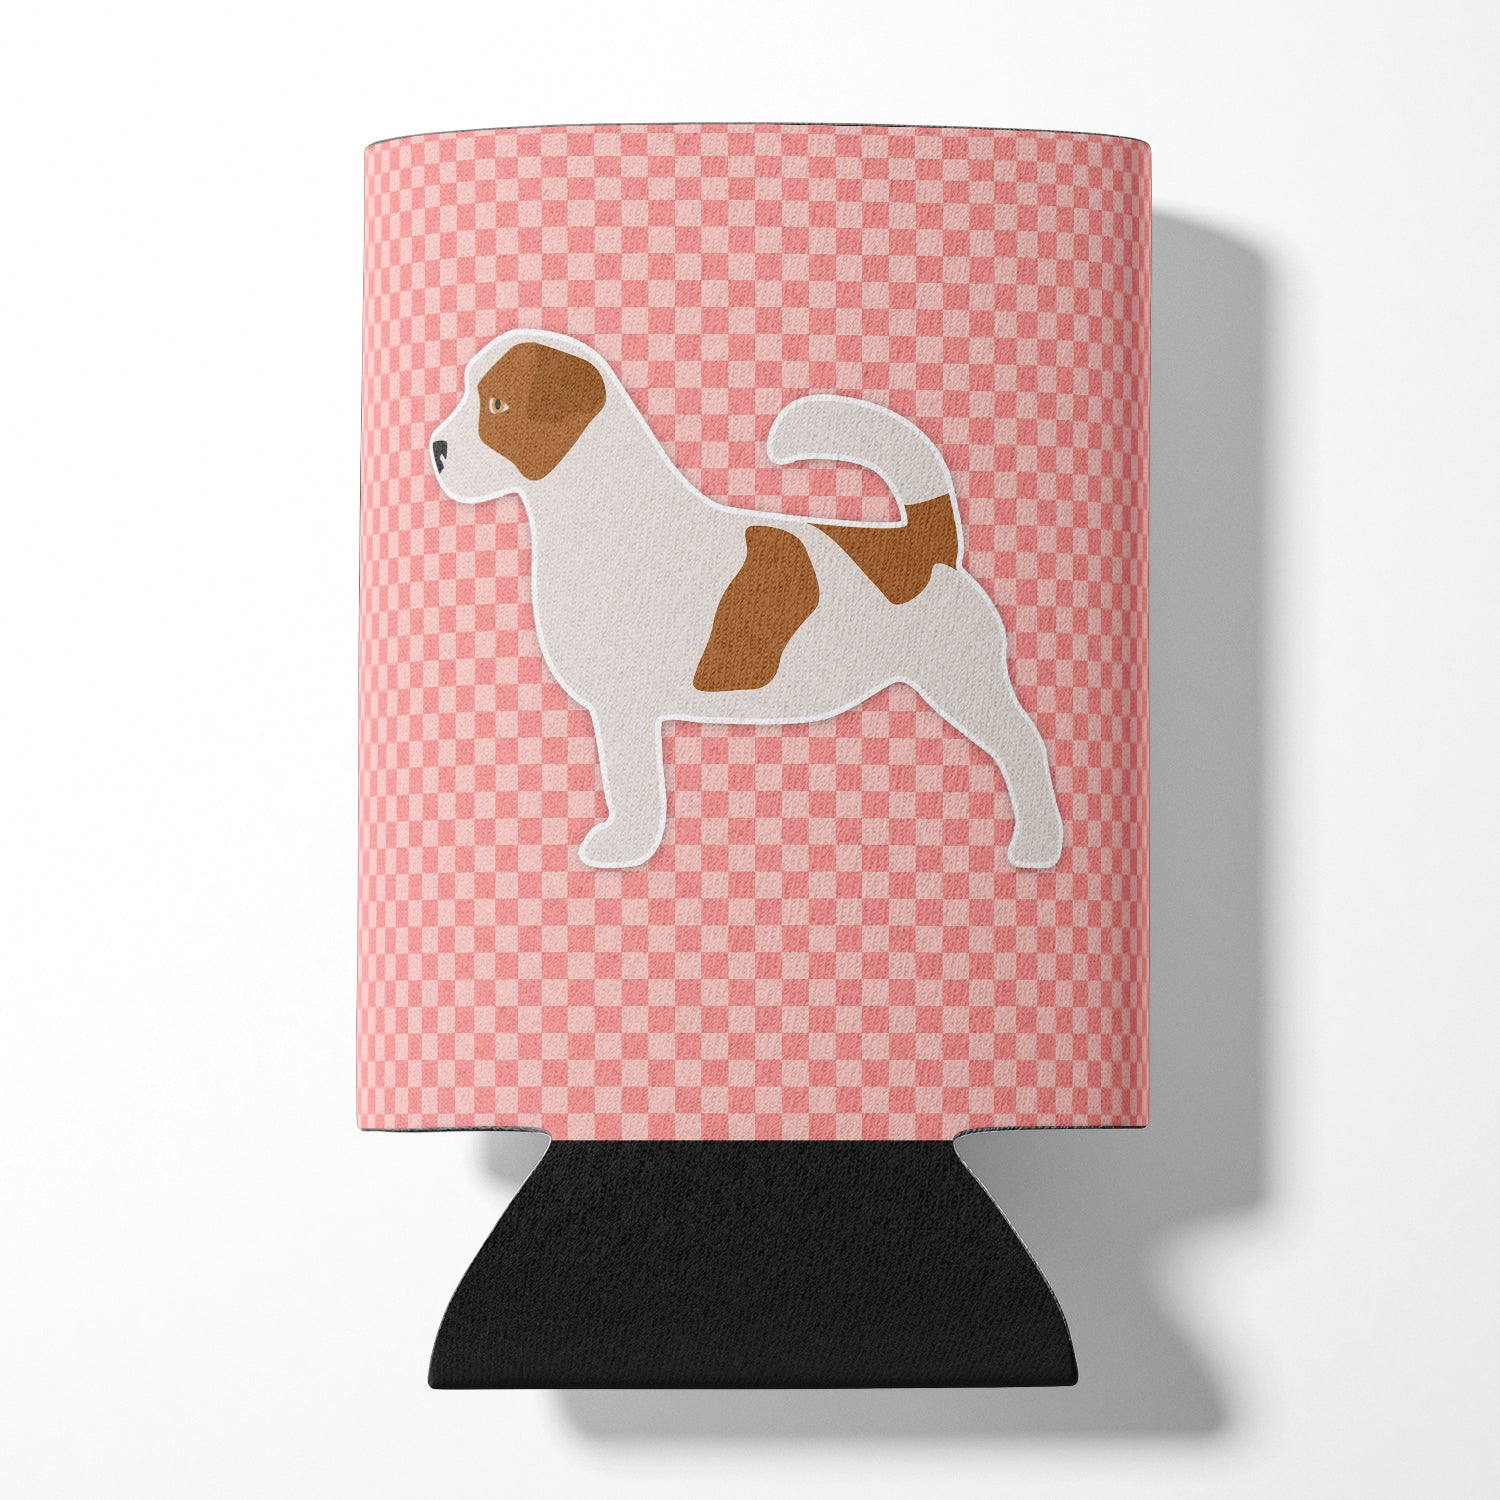 Jack Russell Terrier Checkerboard Pink Can or Bottle Hugger BB3607CC  the-store.com.